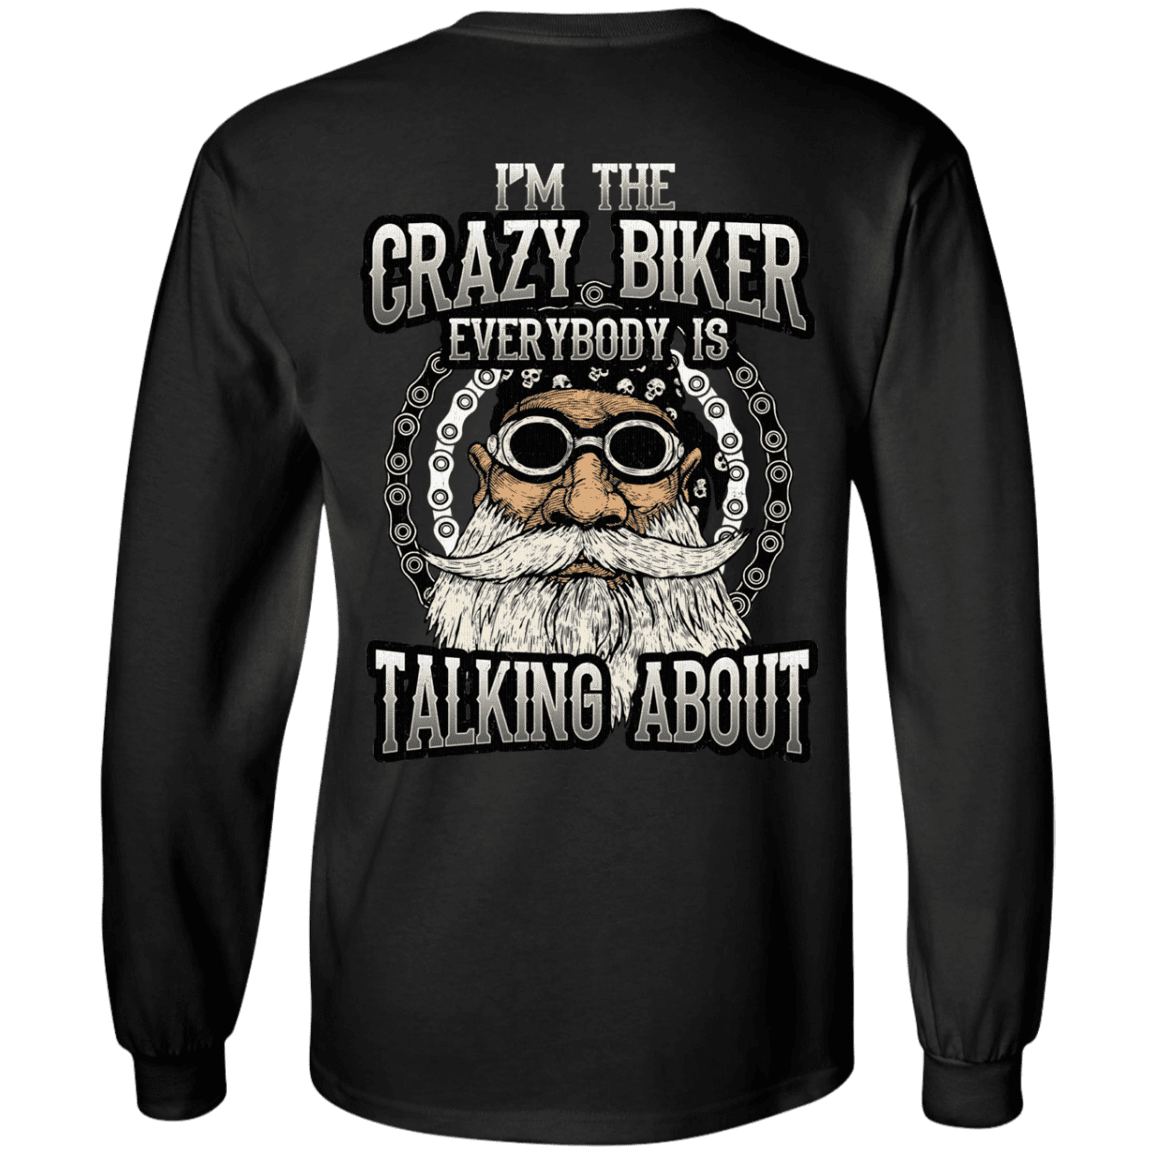 I'm The Crazy Biker Everybody Is Talking About Long Sleeve T-Shirt, Cotton, Black